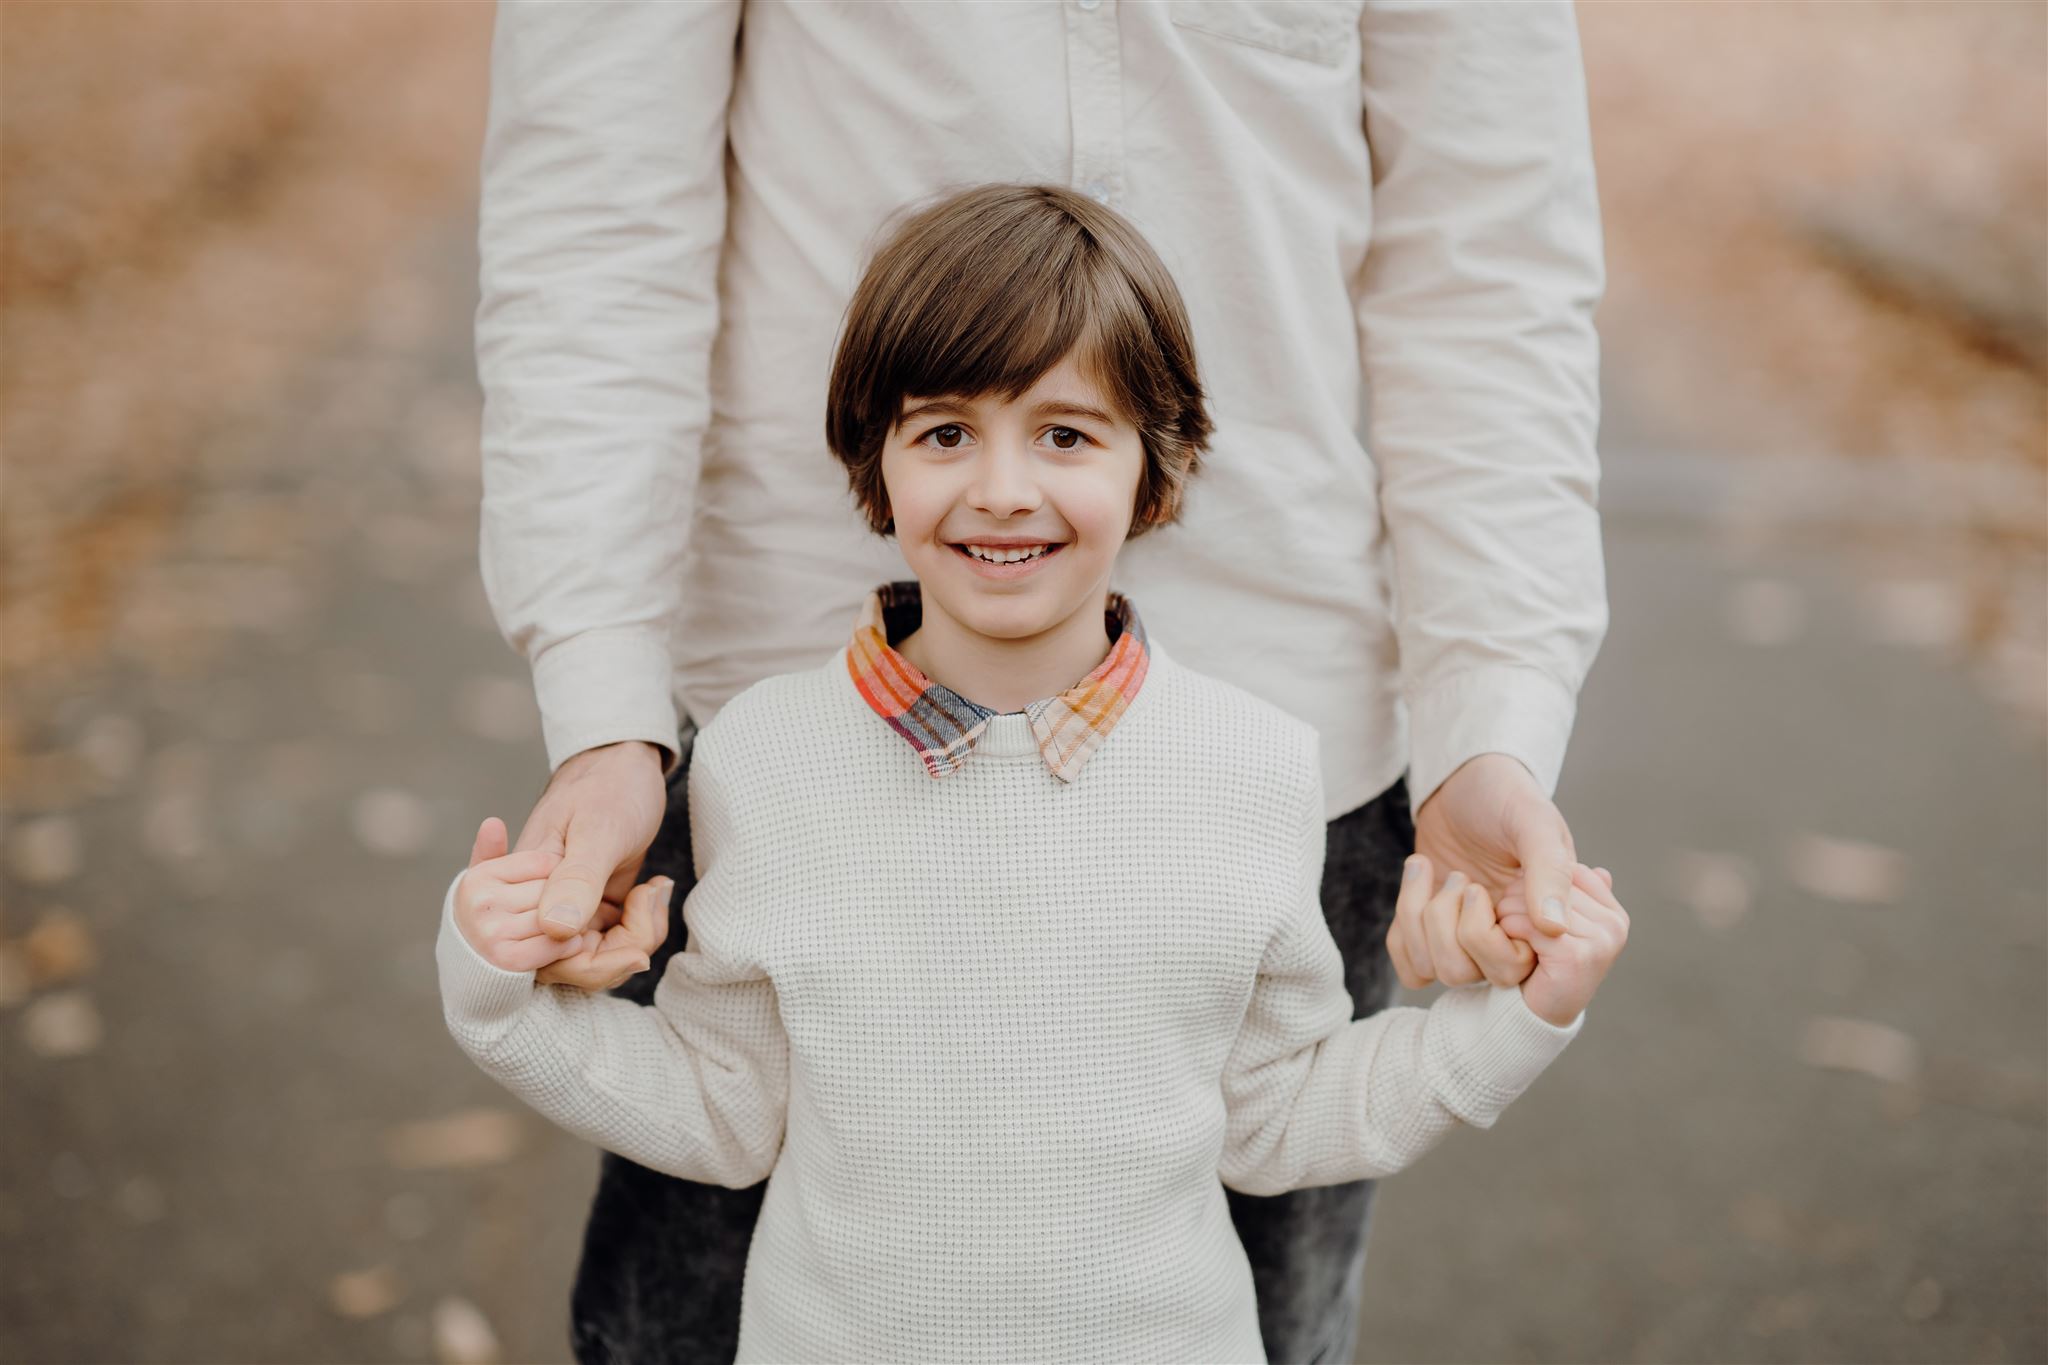 A photograph of a boy and his father during an Autumn Family Photoshoot in Morrinsville taken by Waikato Family Photographer Haley Adele